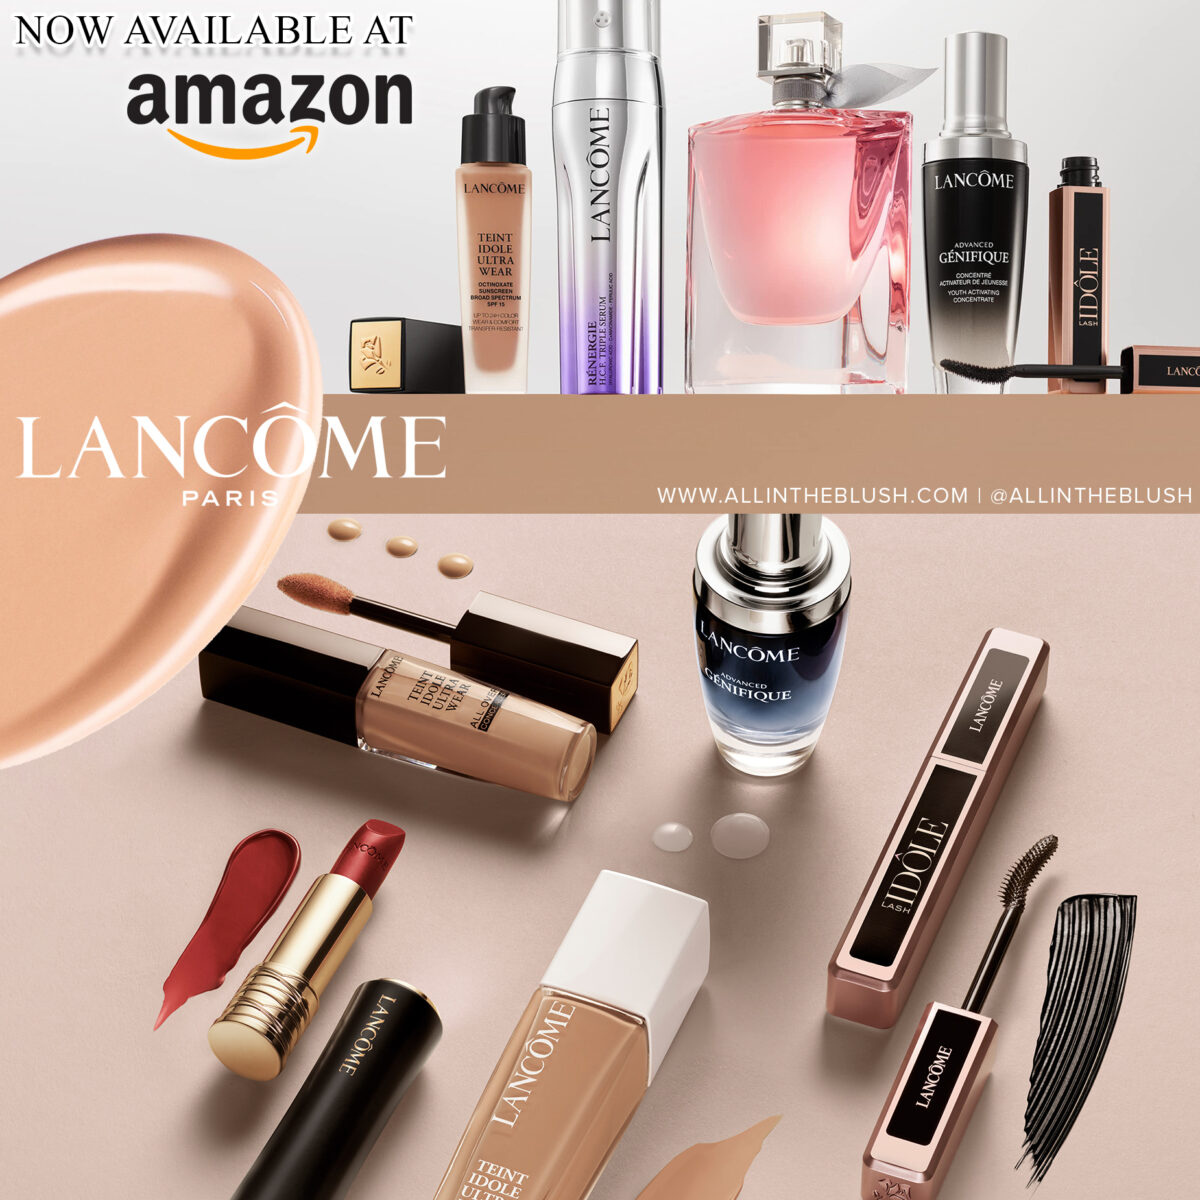 Lancôme Now Available at Amazon